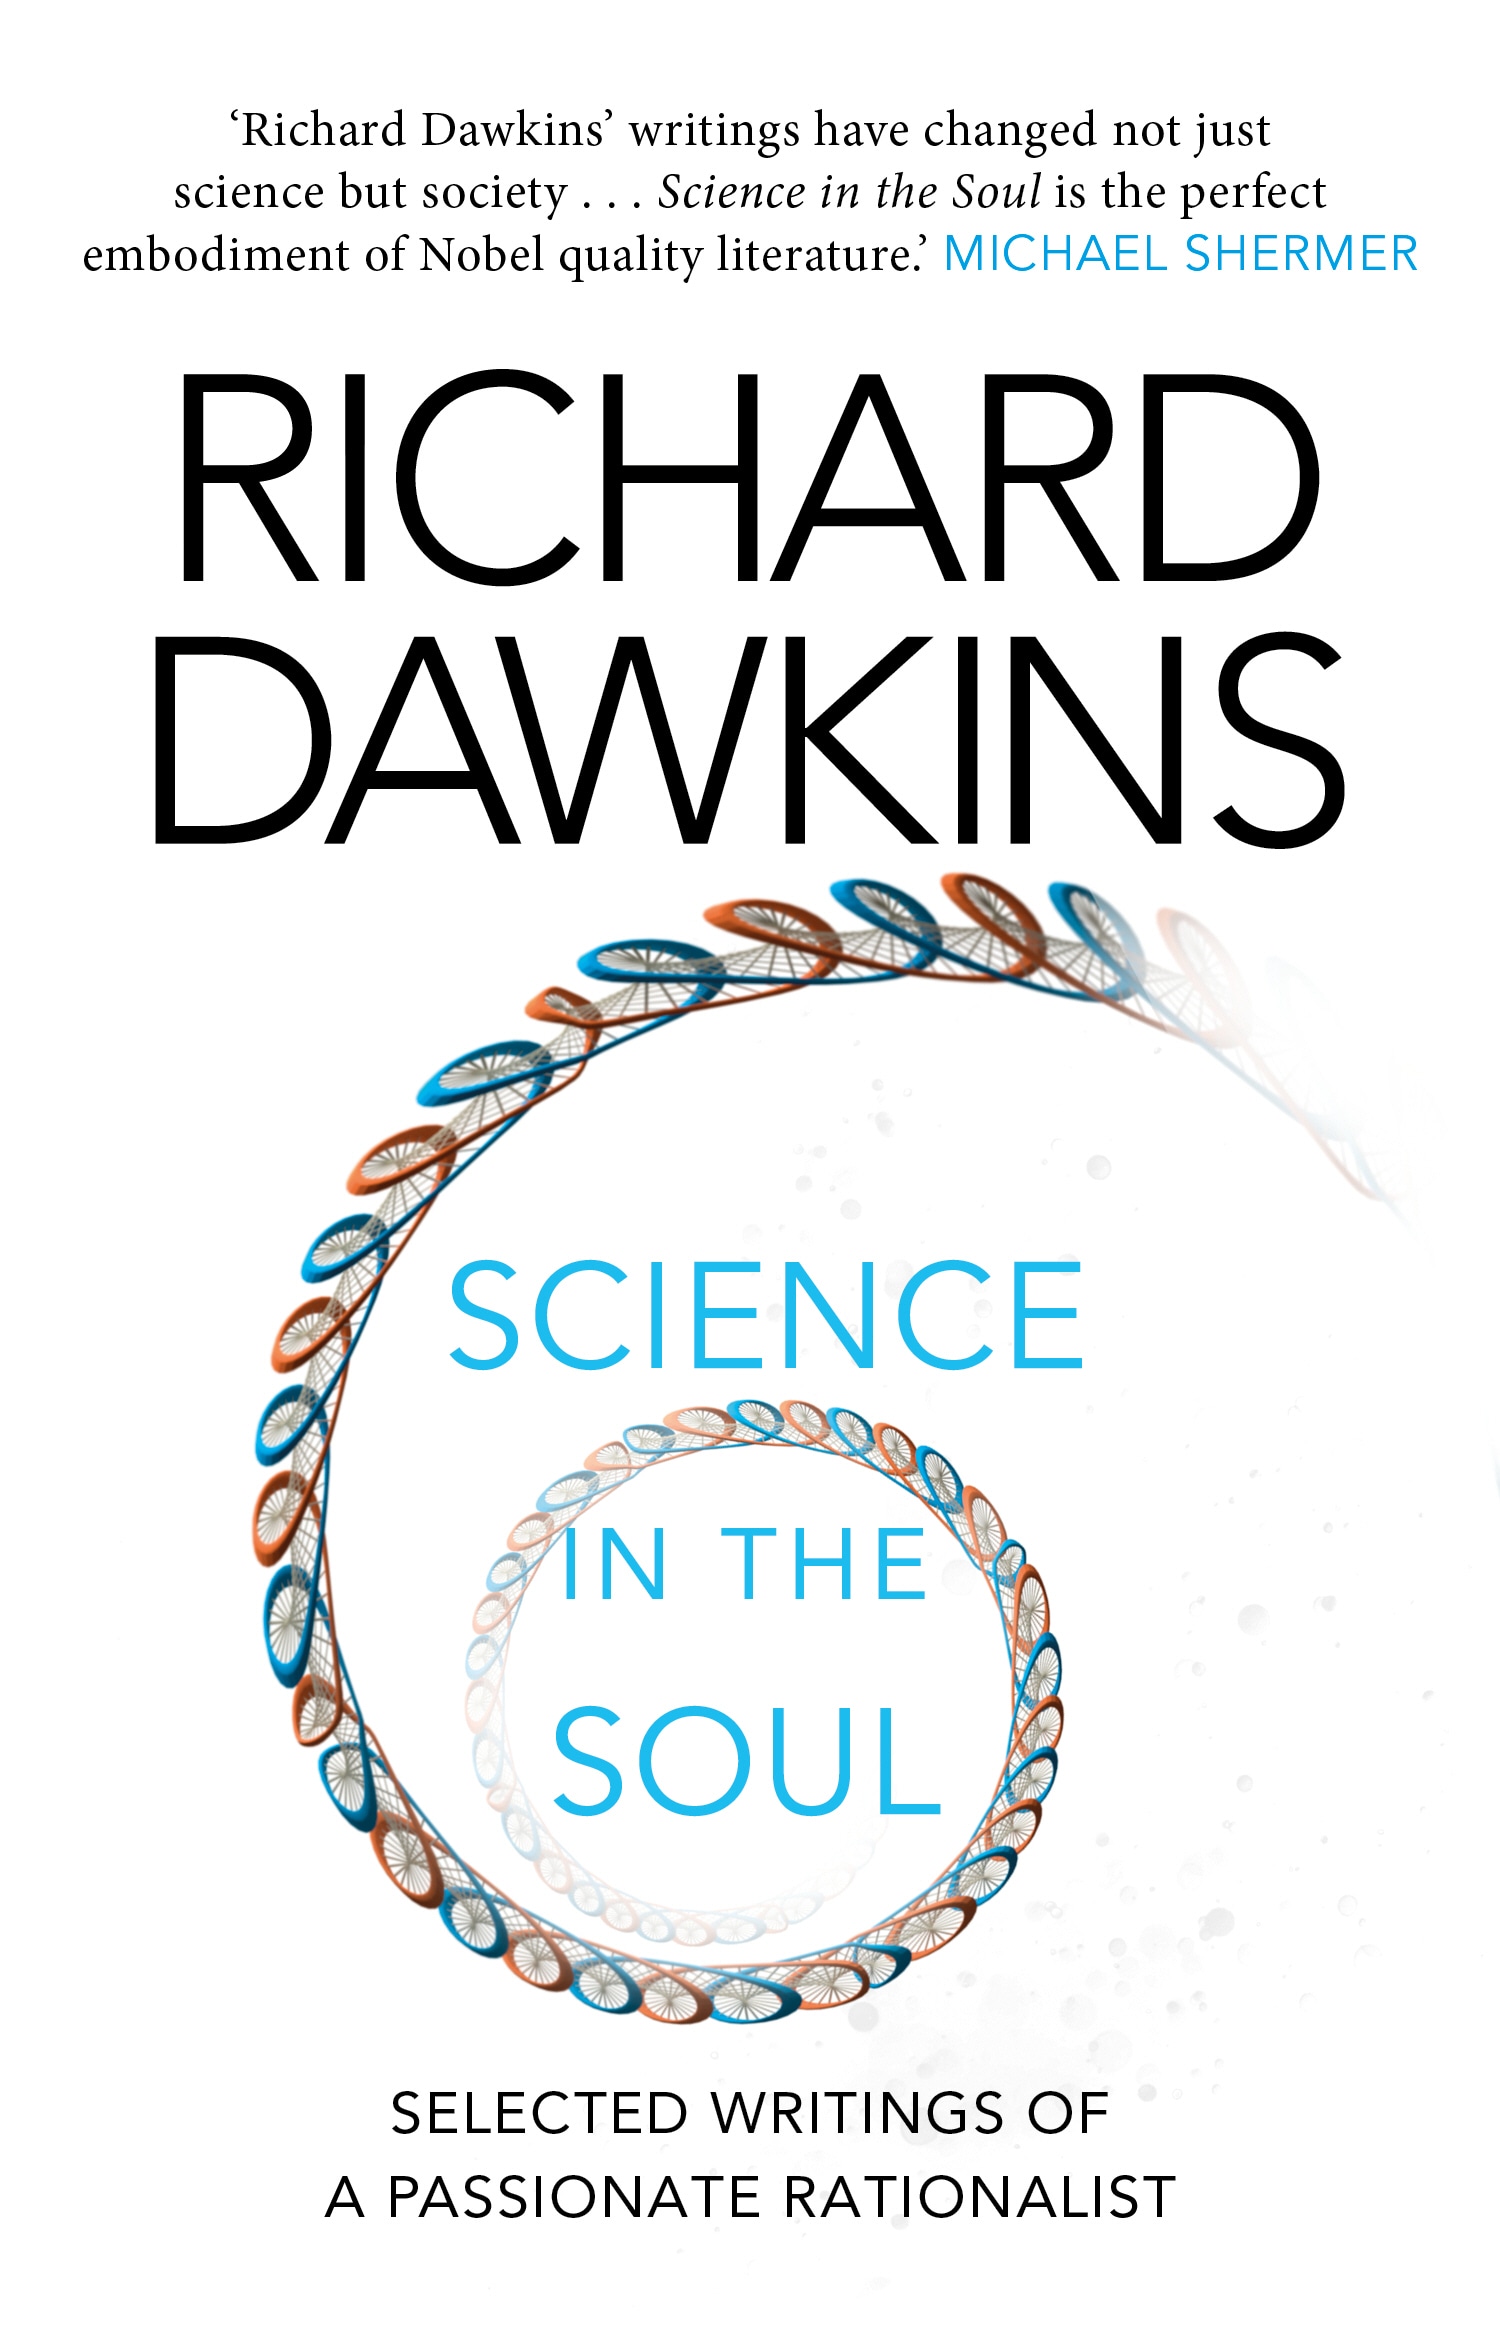 Book “Science in the Soul” by Richard Dawkins — May 31, 2018